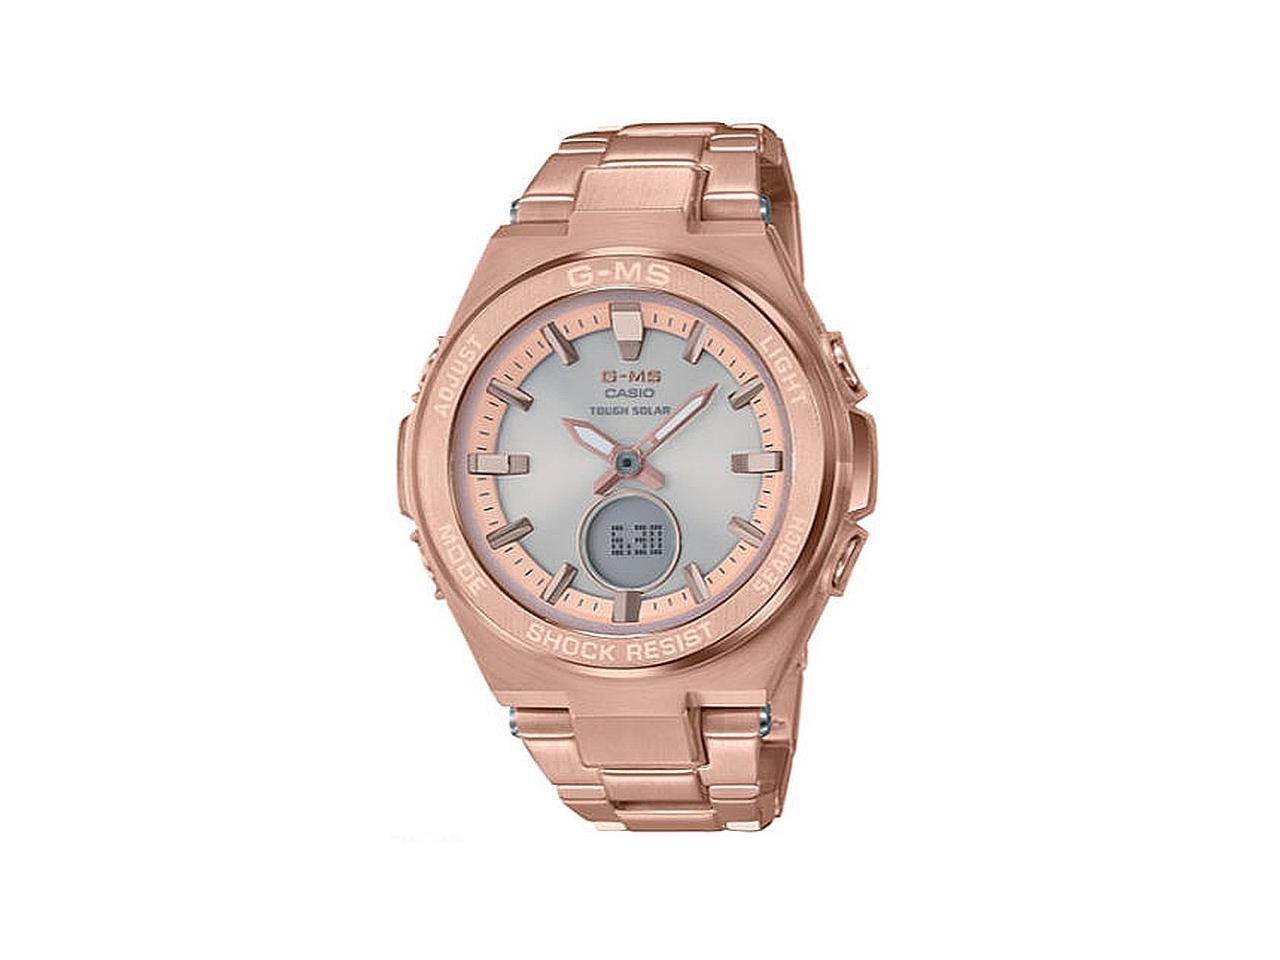 Casio Baby-G G-MS Anadigi Rose Gold Plated Silver Dial Watch MSG-S200DG-4ADR - Diligence1International